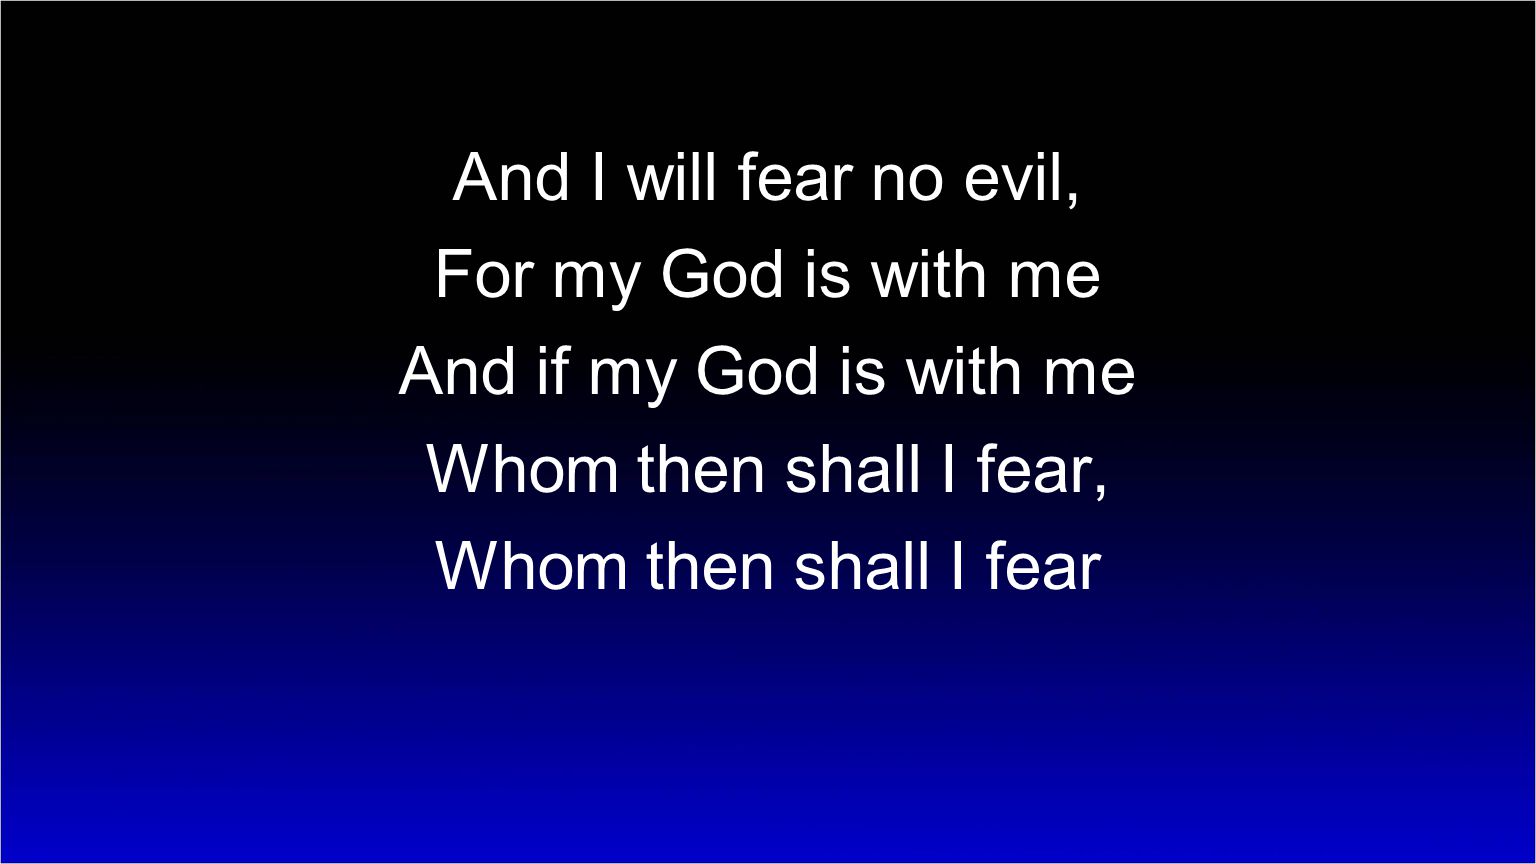 And I will fear no evil, For my God is with me. And if my God is with me. Whom then shall I fear,